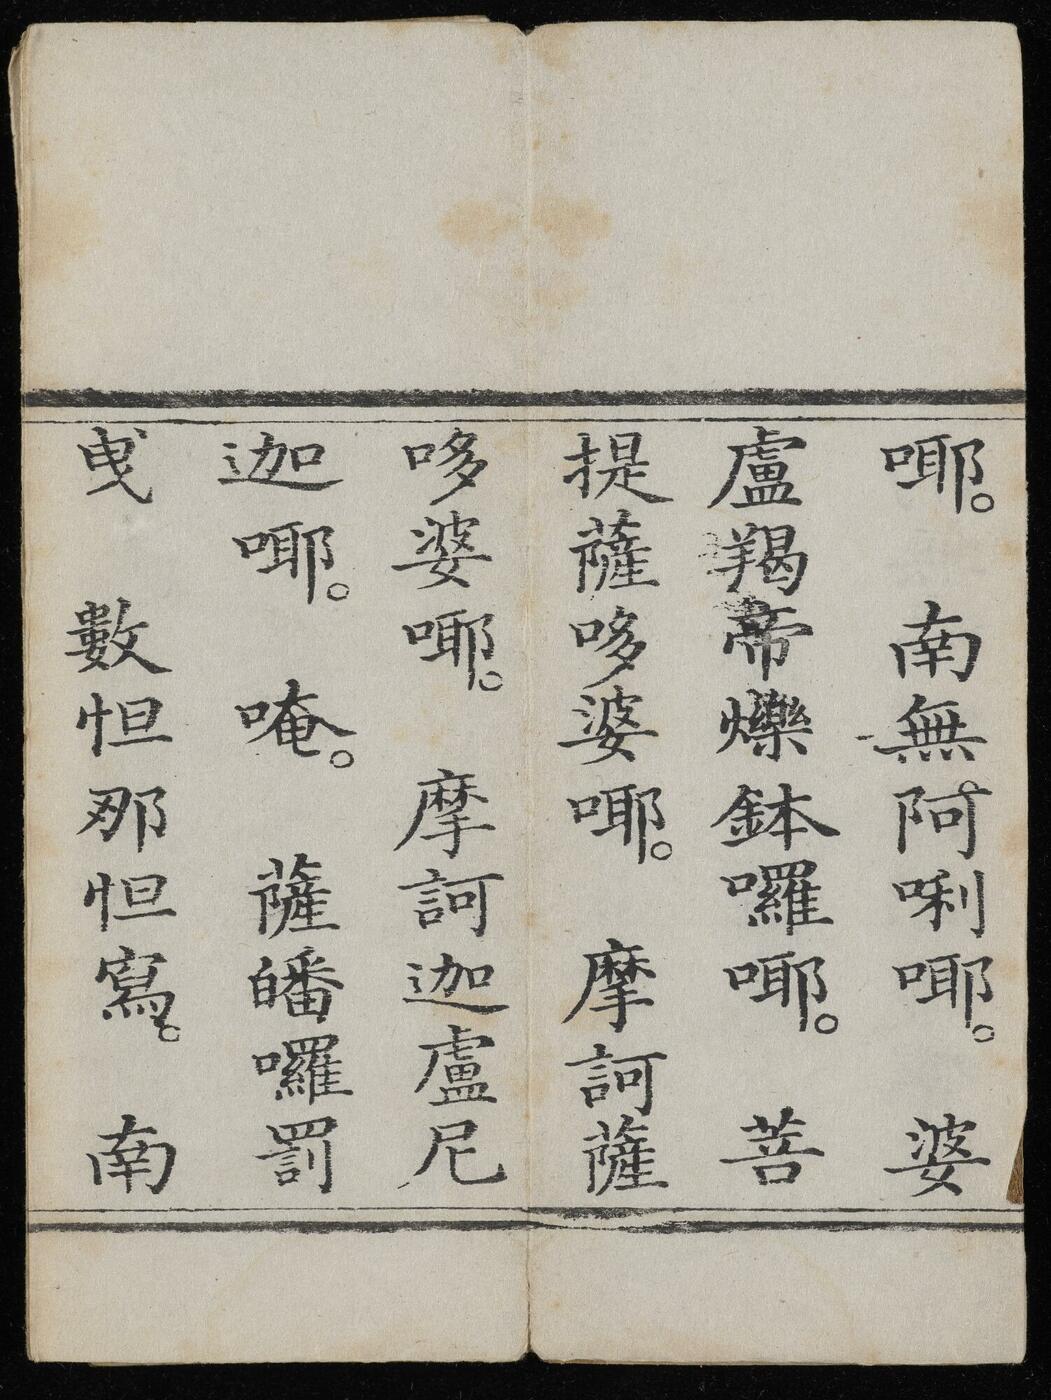 Heart Sutra of the Divine Incantations of Great Sorrow, 1809